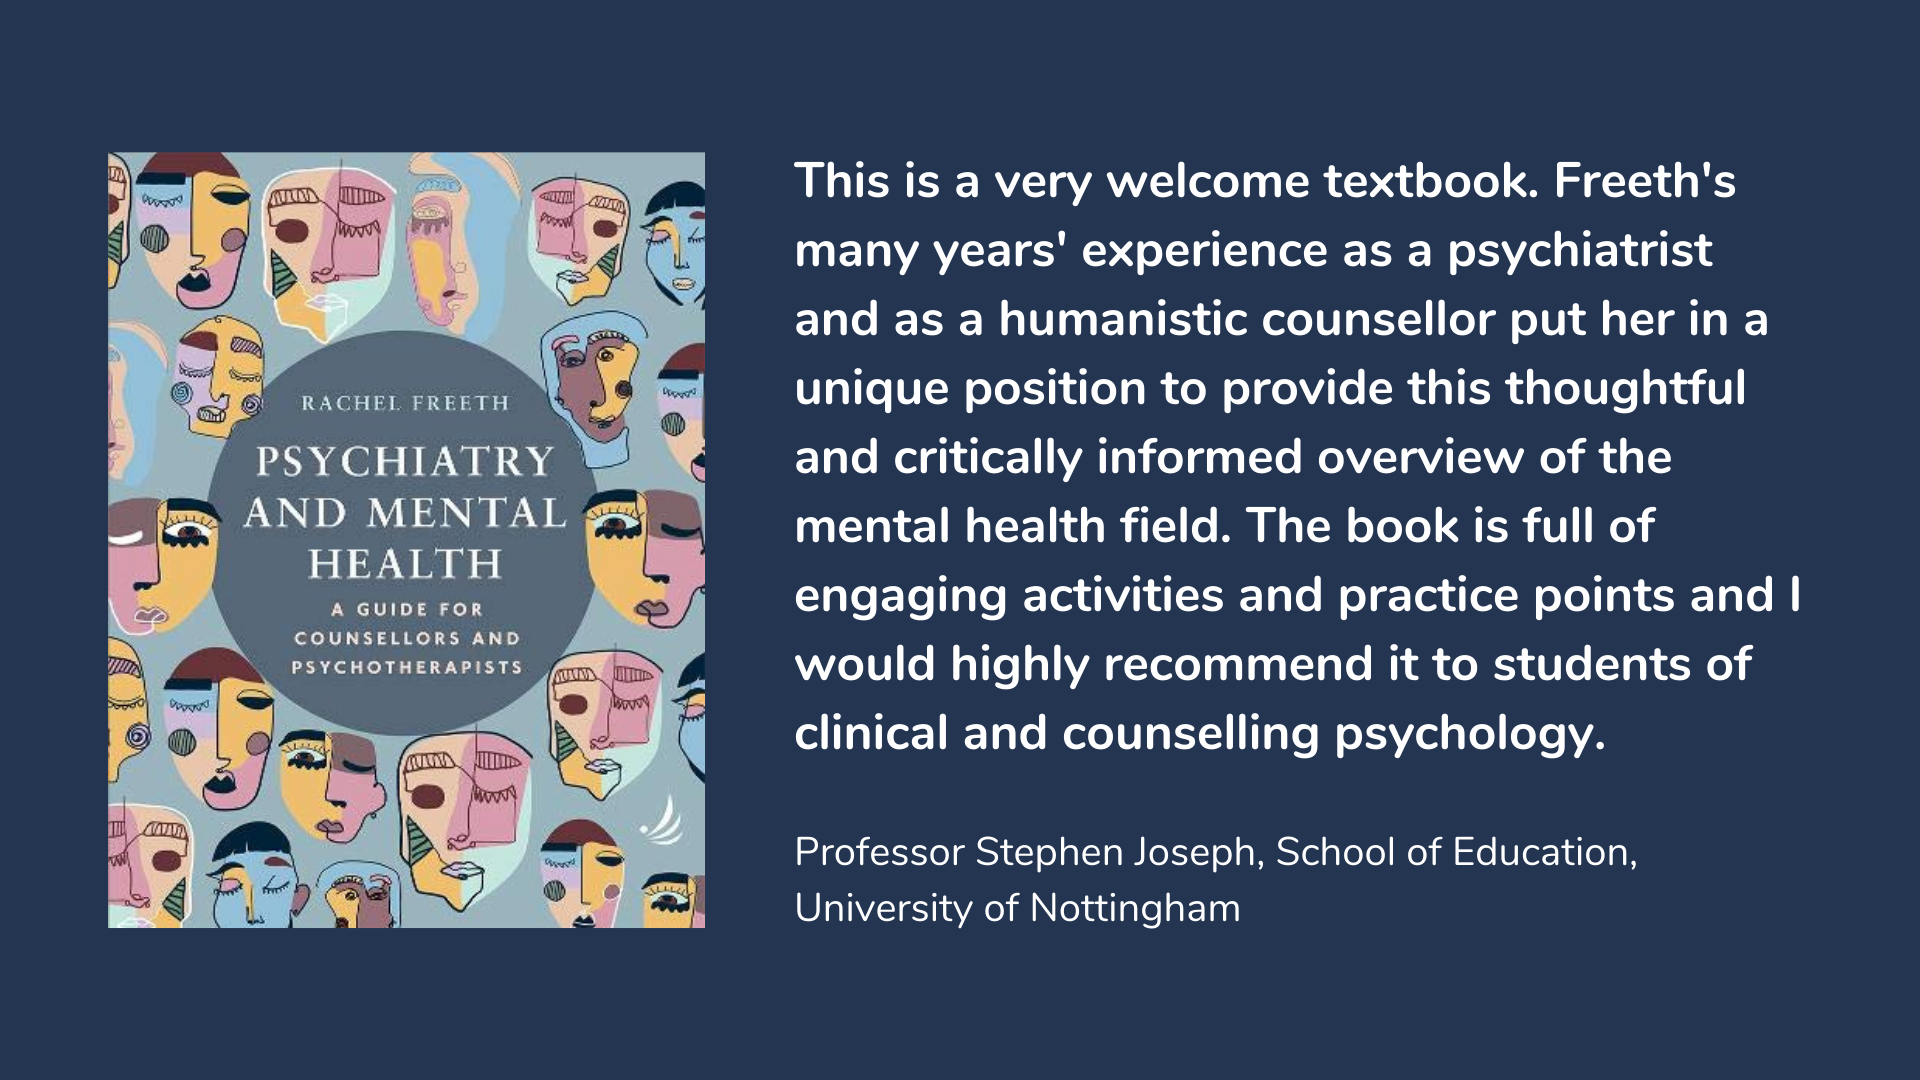 Psychiatry And Mental Health: A Guide For Counsellors And Psychotherapists, book cover and description.